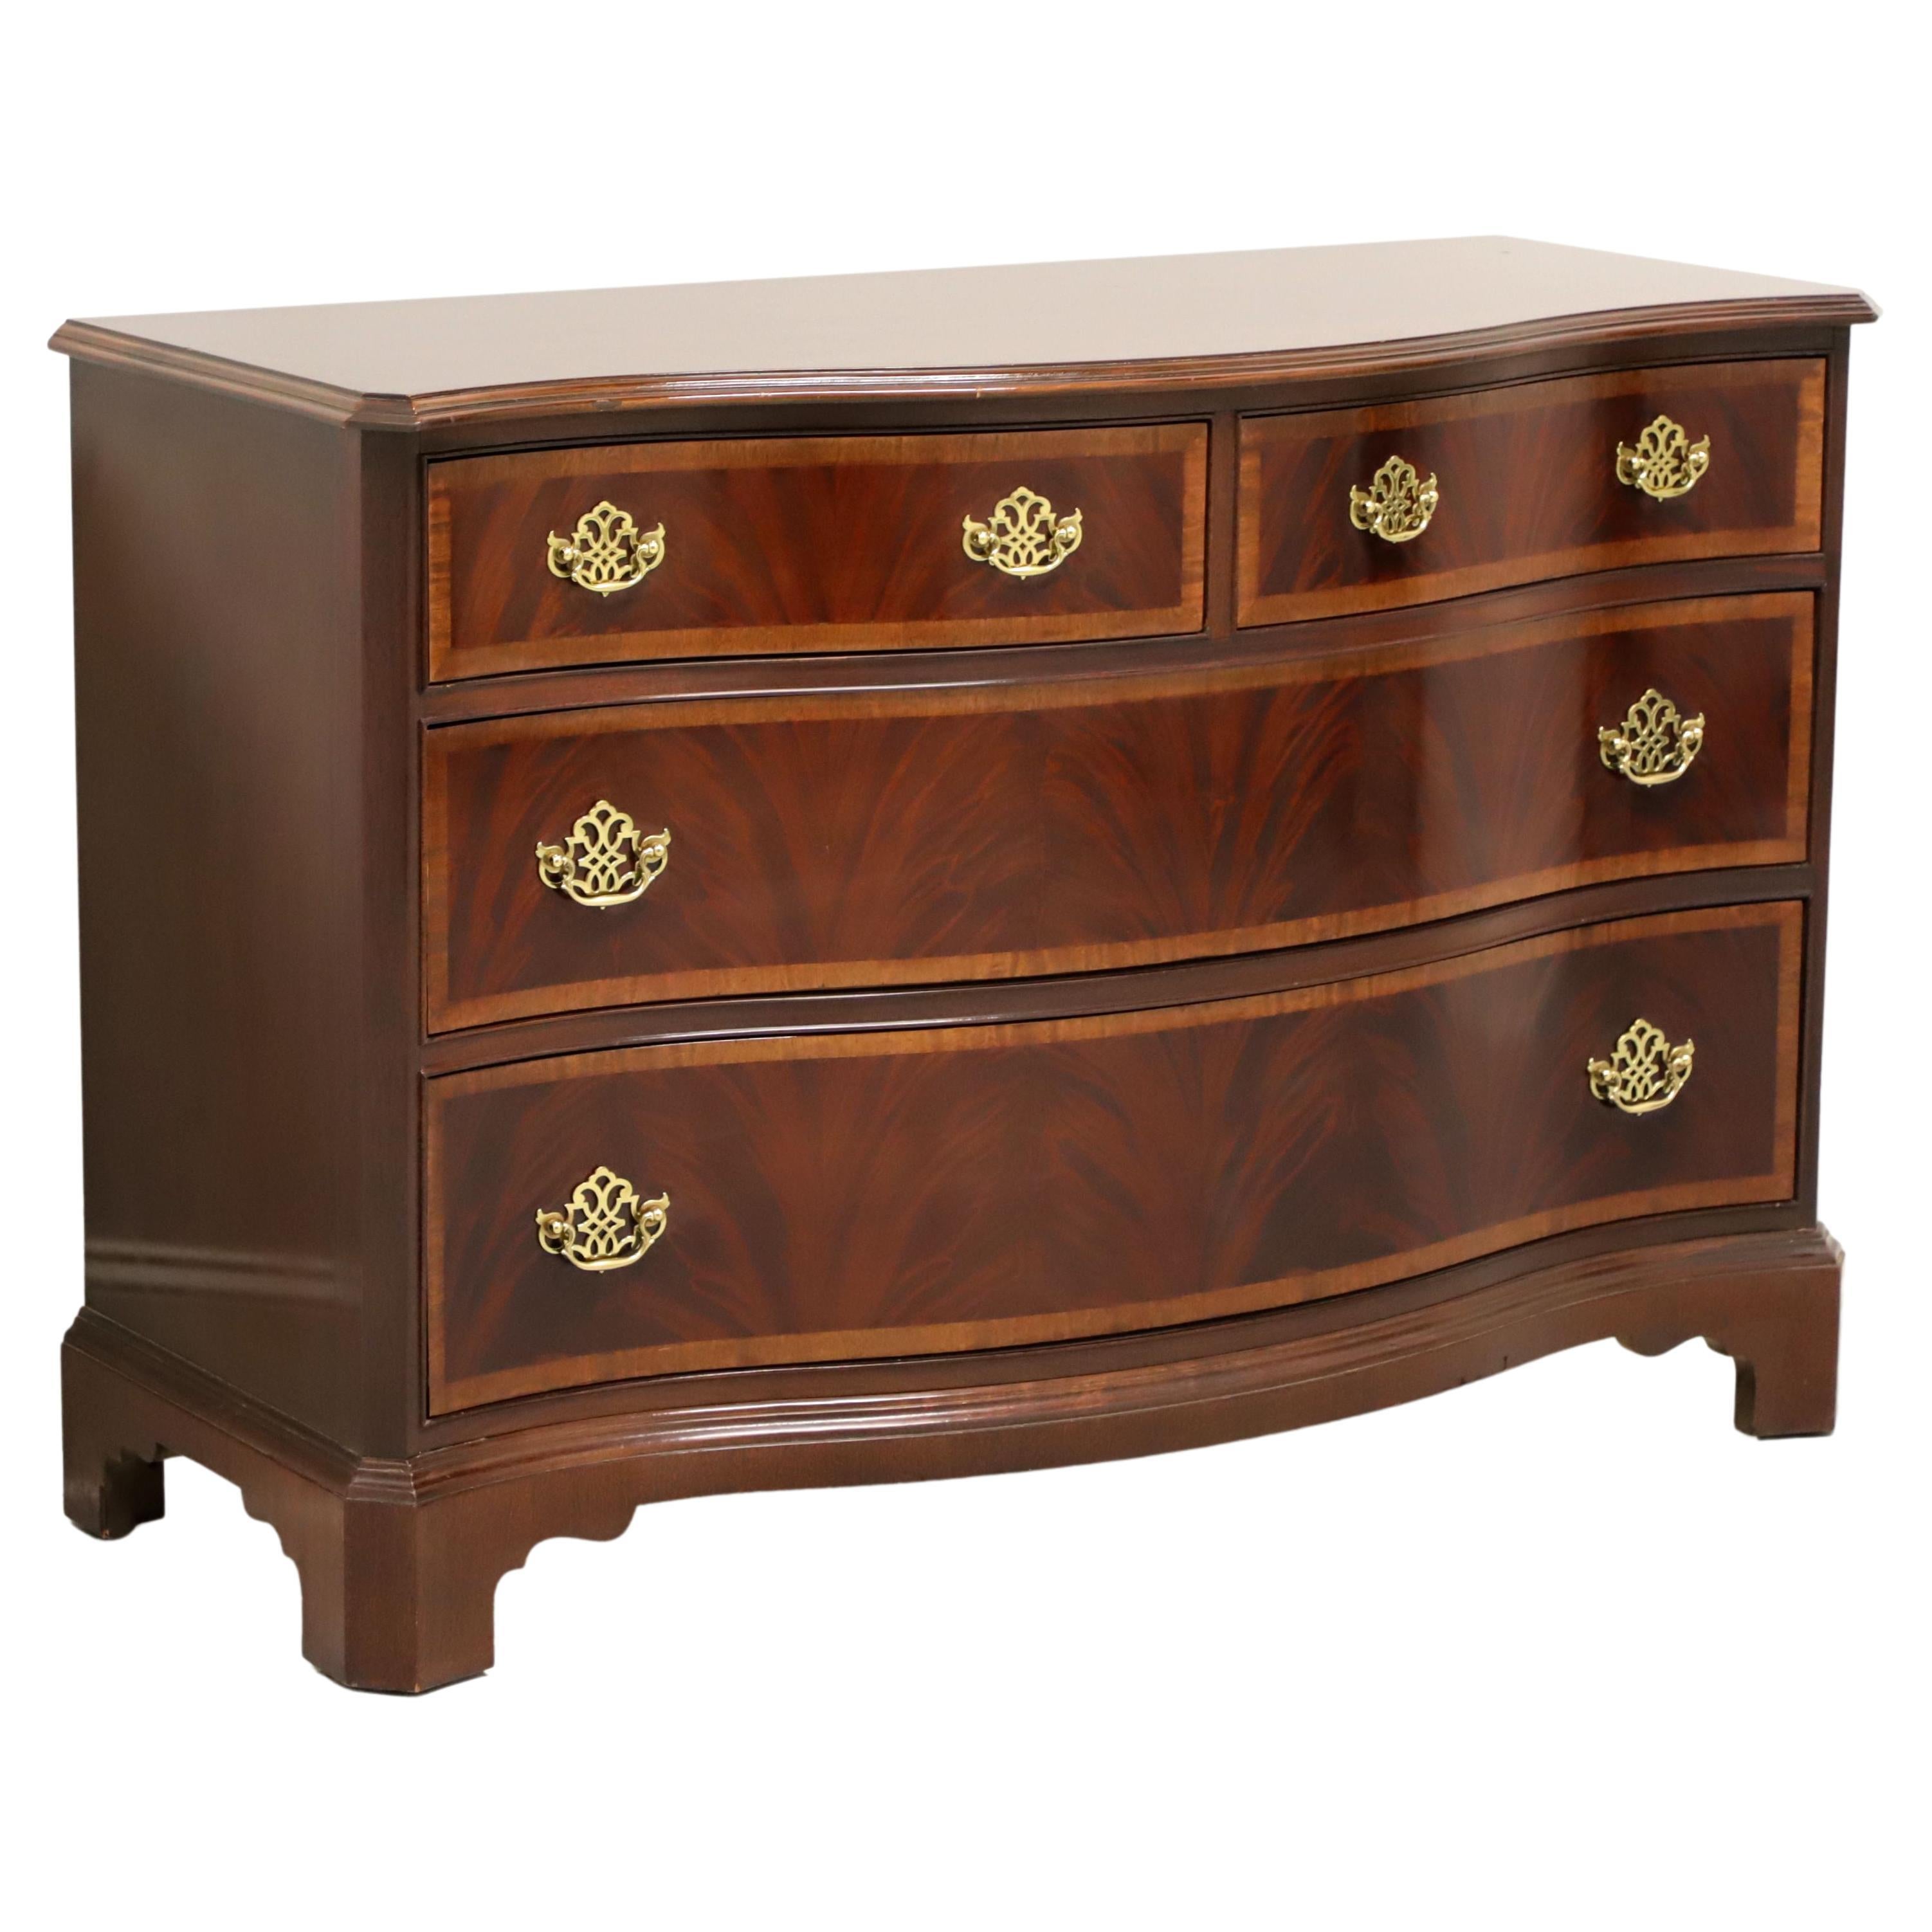 HICKORY American Masterpiece Banded Mahogany Chippendale Bowfront Bachelor Chest